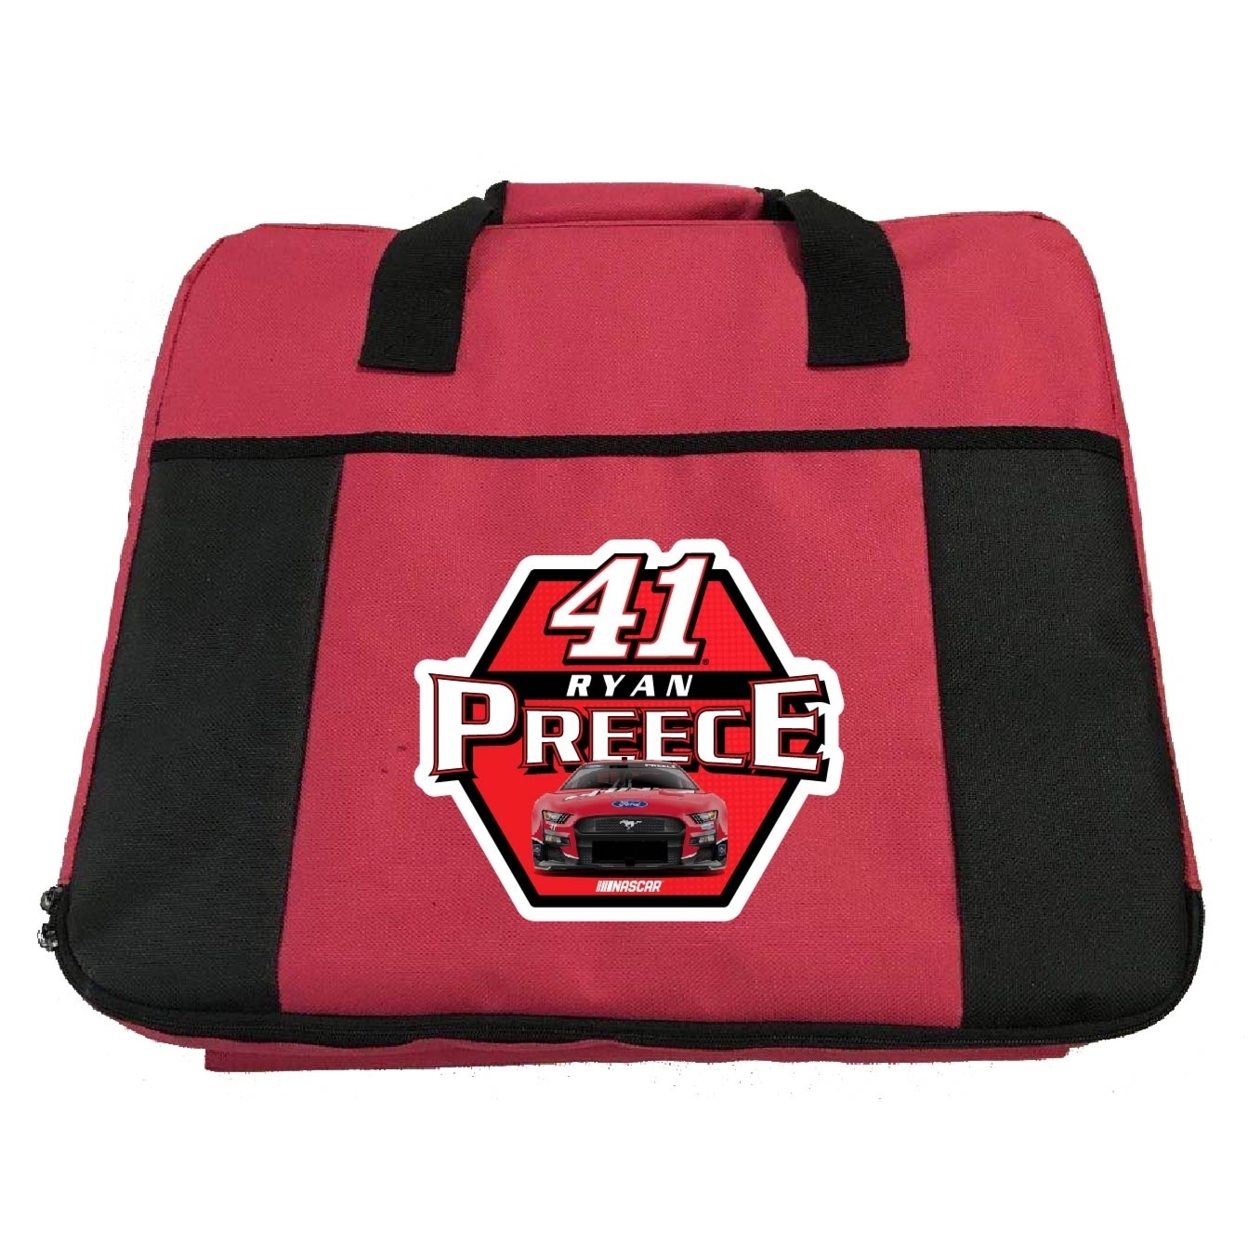 #41 Ryan Preece Officially Licensed Deluxe Seat Cushion